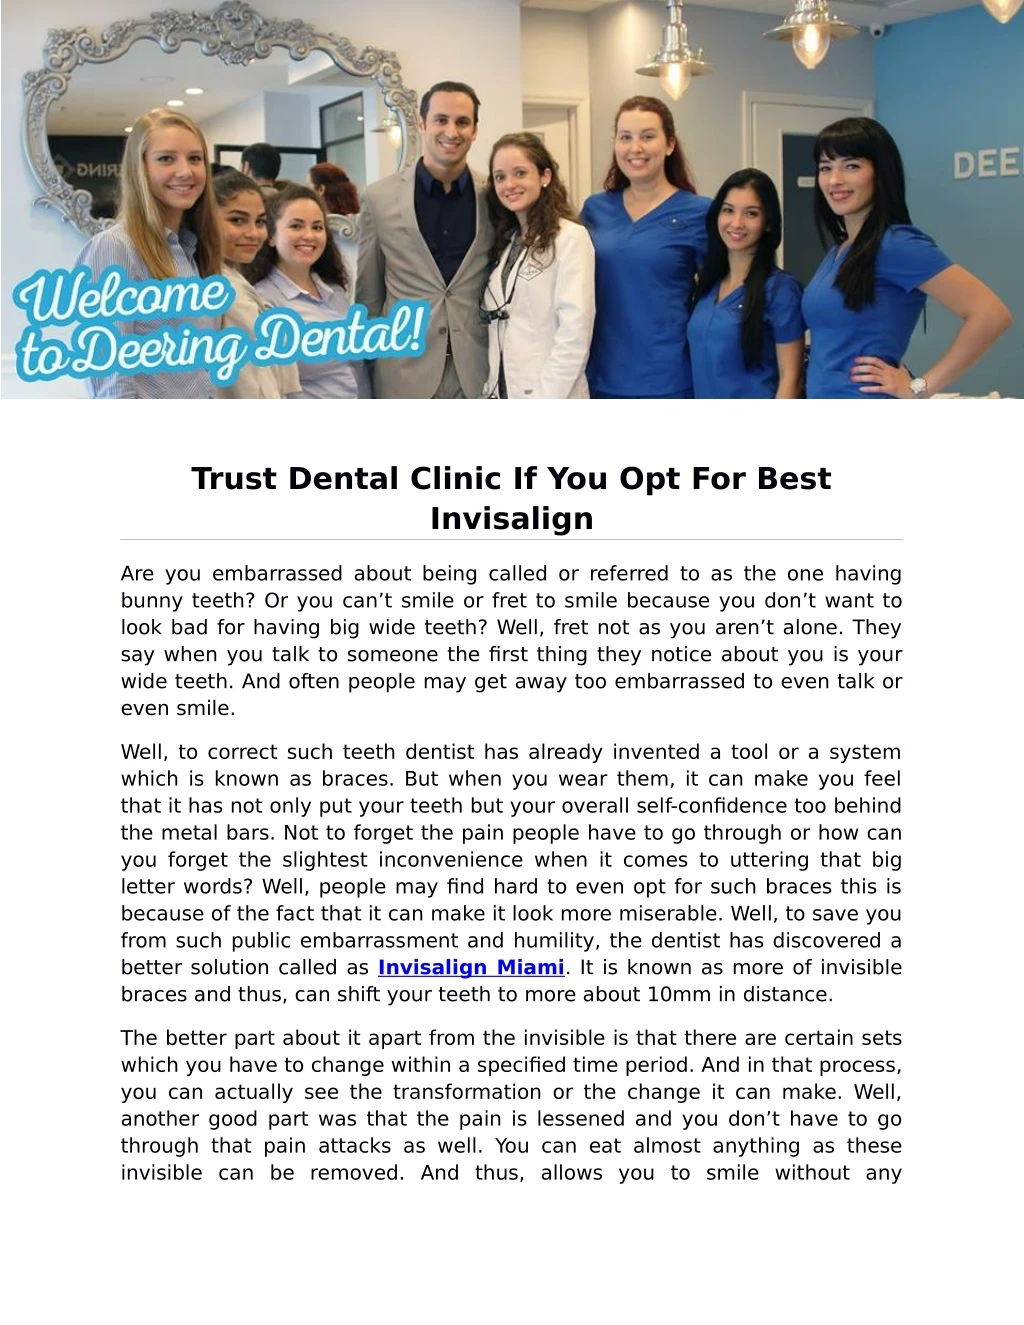 trust dental clinic if you opt for best invisalign